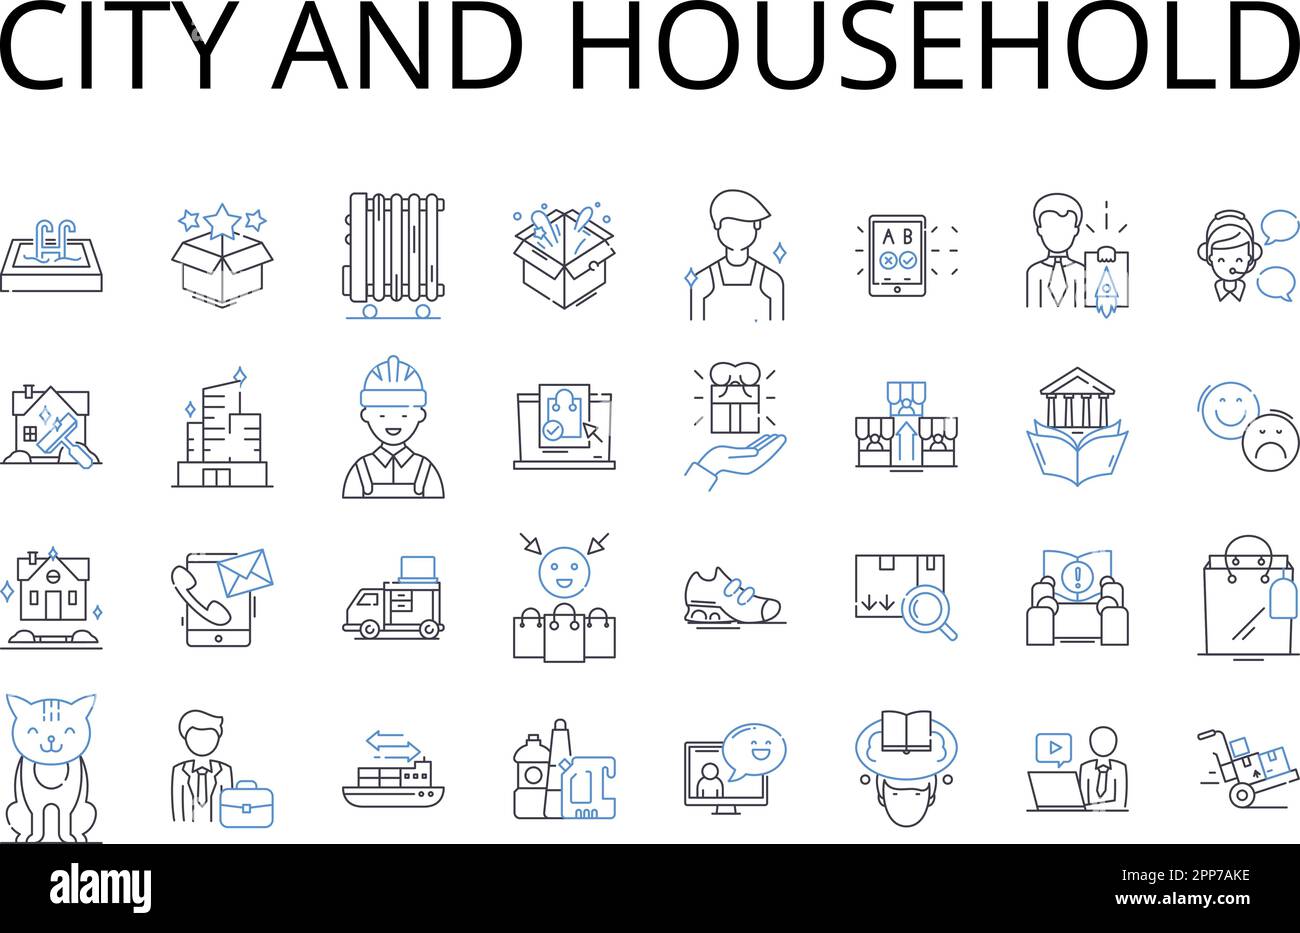 City and household line icons collection. ity, Metropolis, Urban center, Megalopolis, Municipality, Capital, Town vector and linear illustration Stock Vector